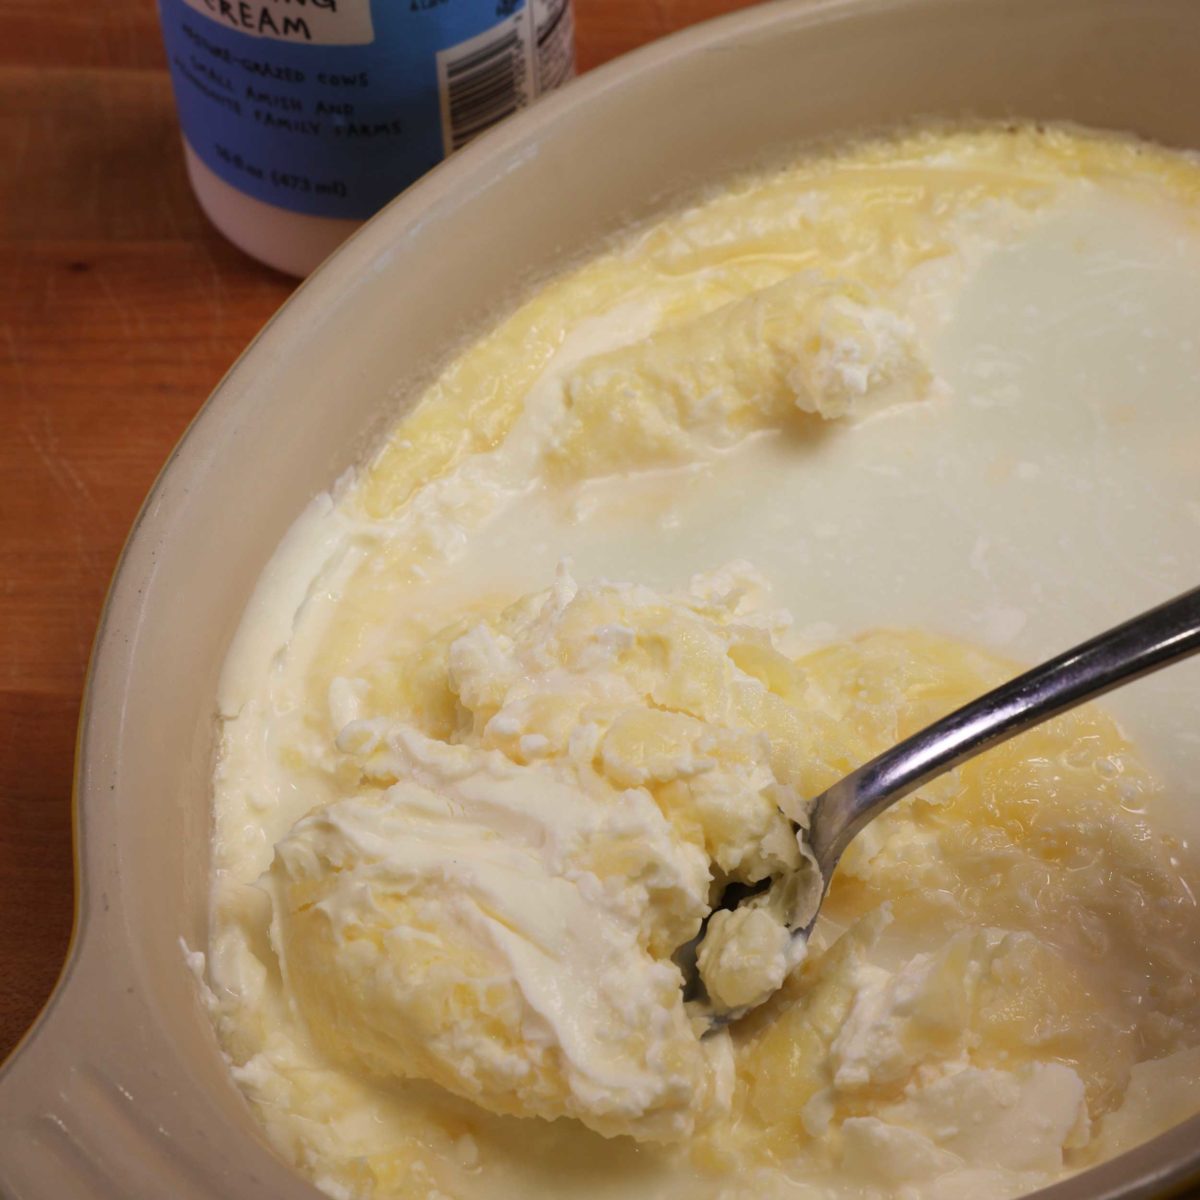 clotted cream in a yellow bowl